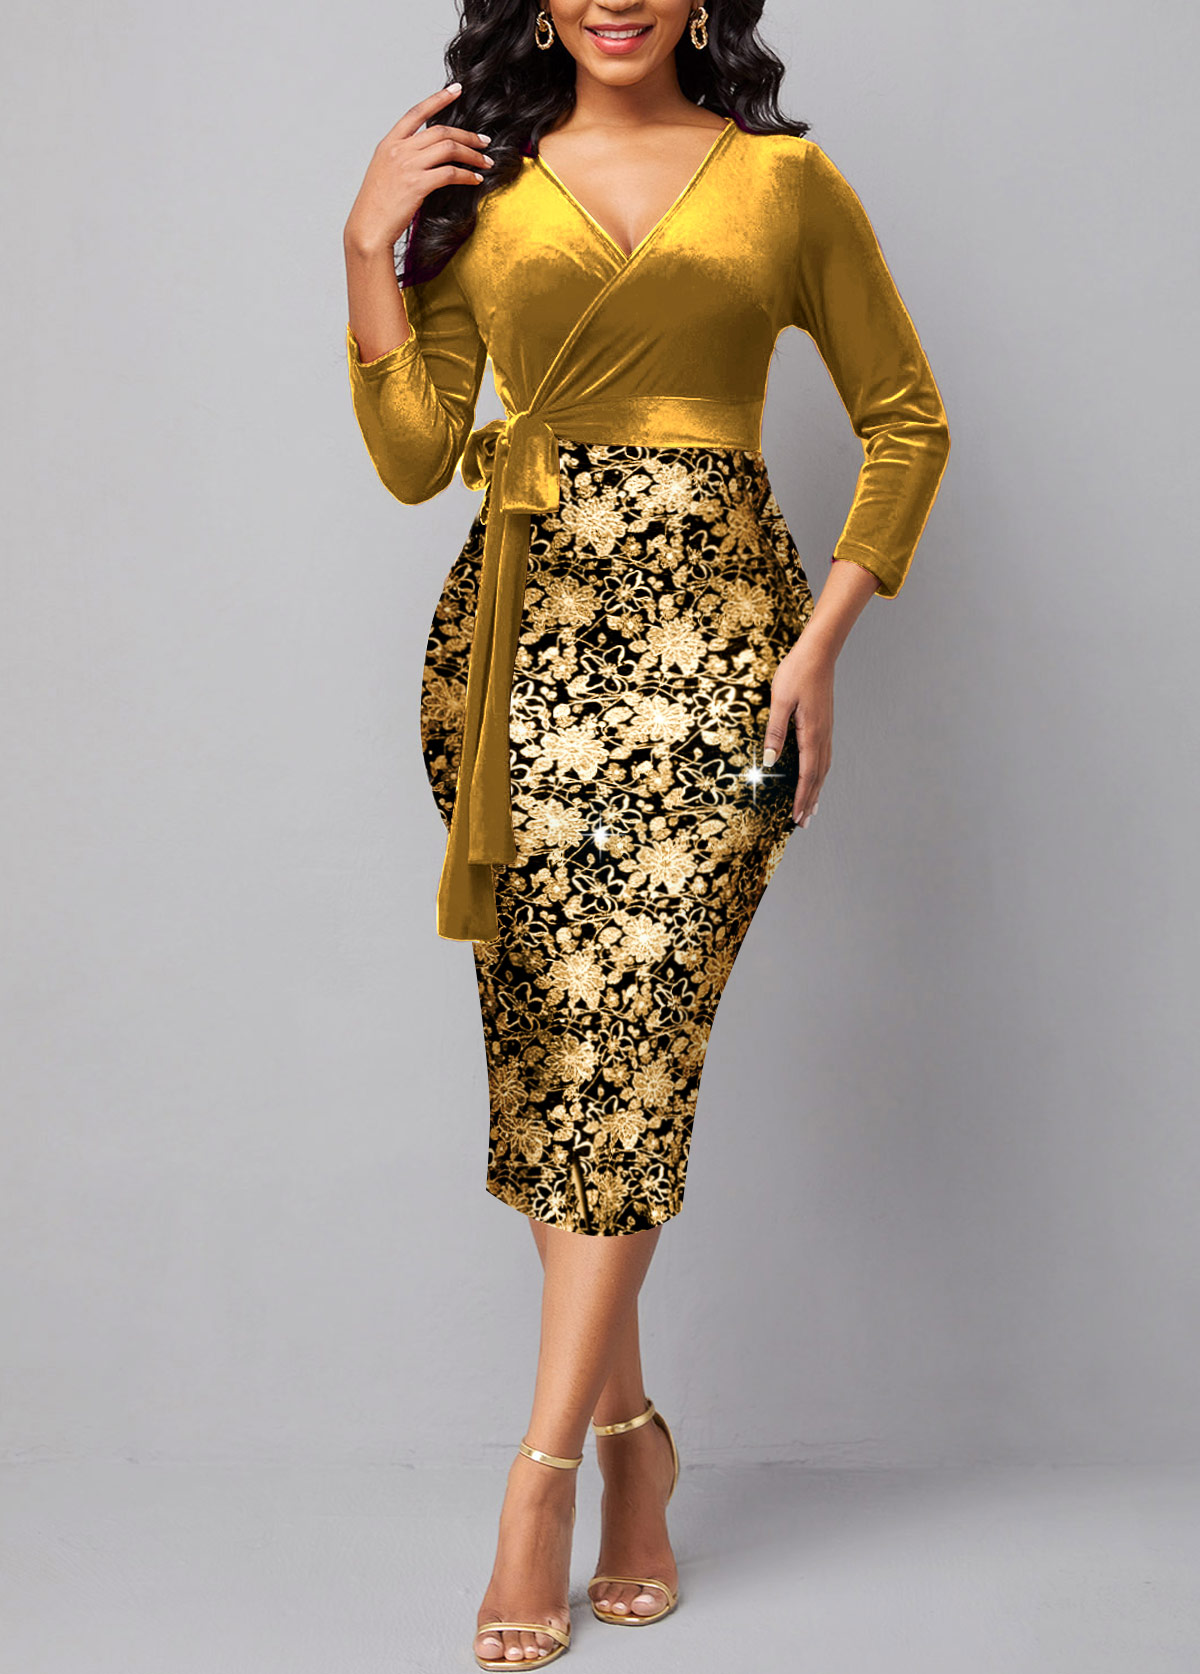 New Year Floral Print Hot Stamping Belted Golden Dress